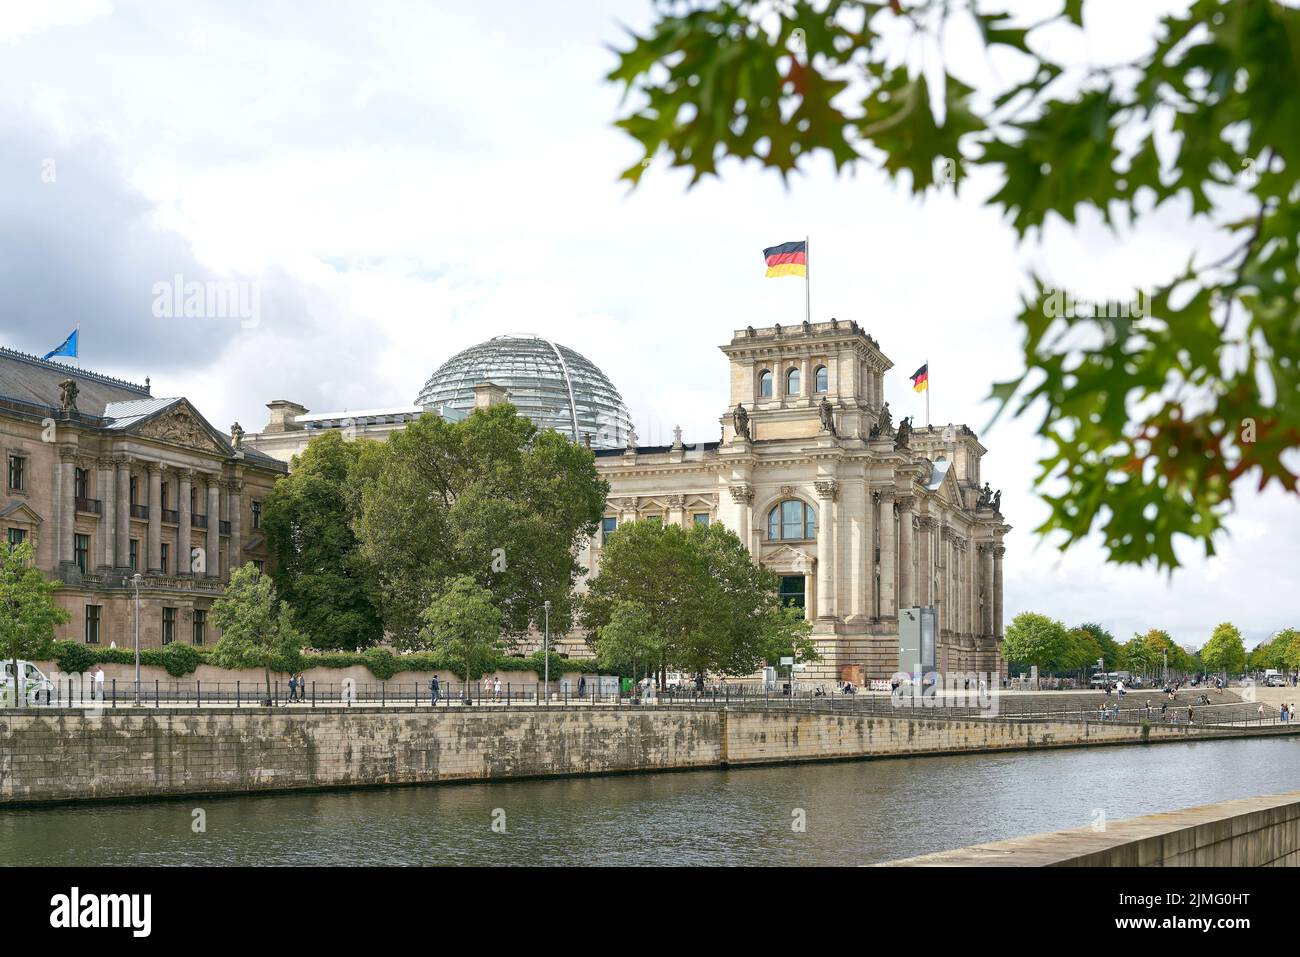 The Reichstag in Berlin on the banks of the Spree River Stock Photo